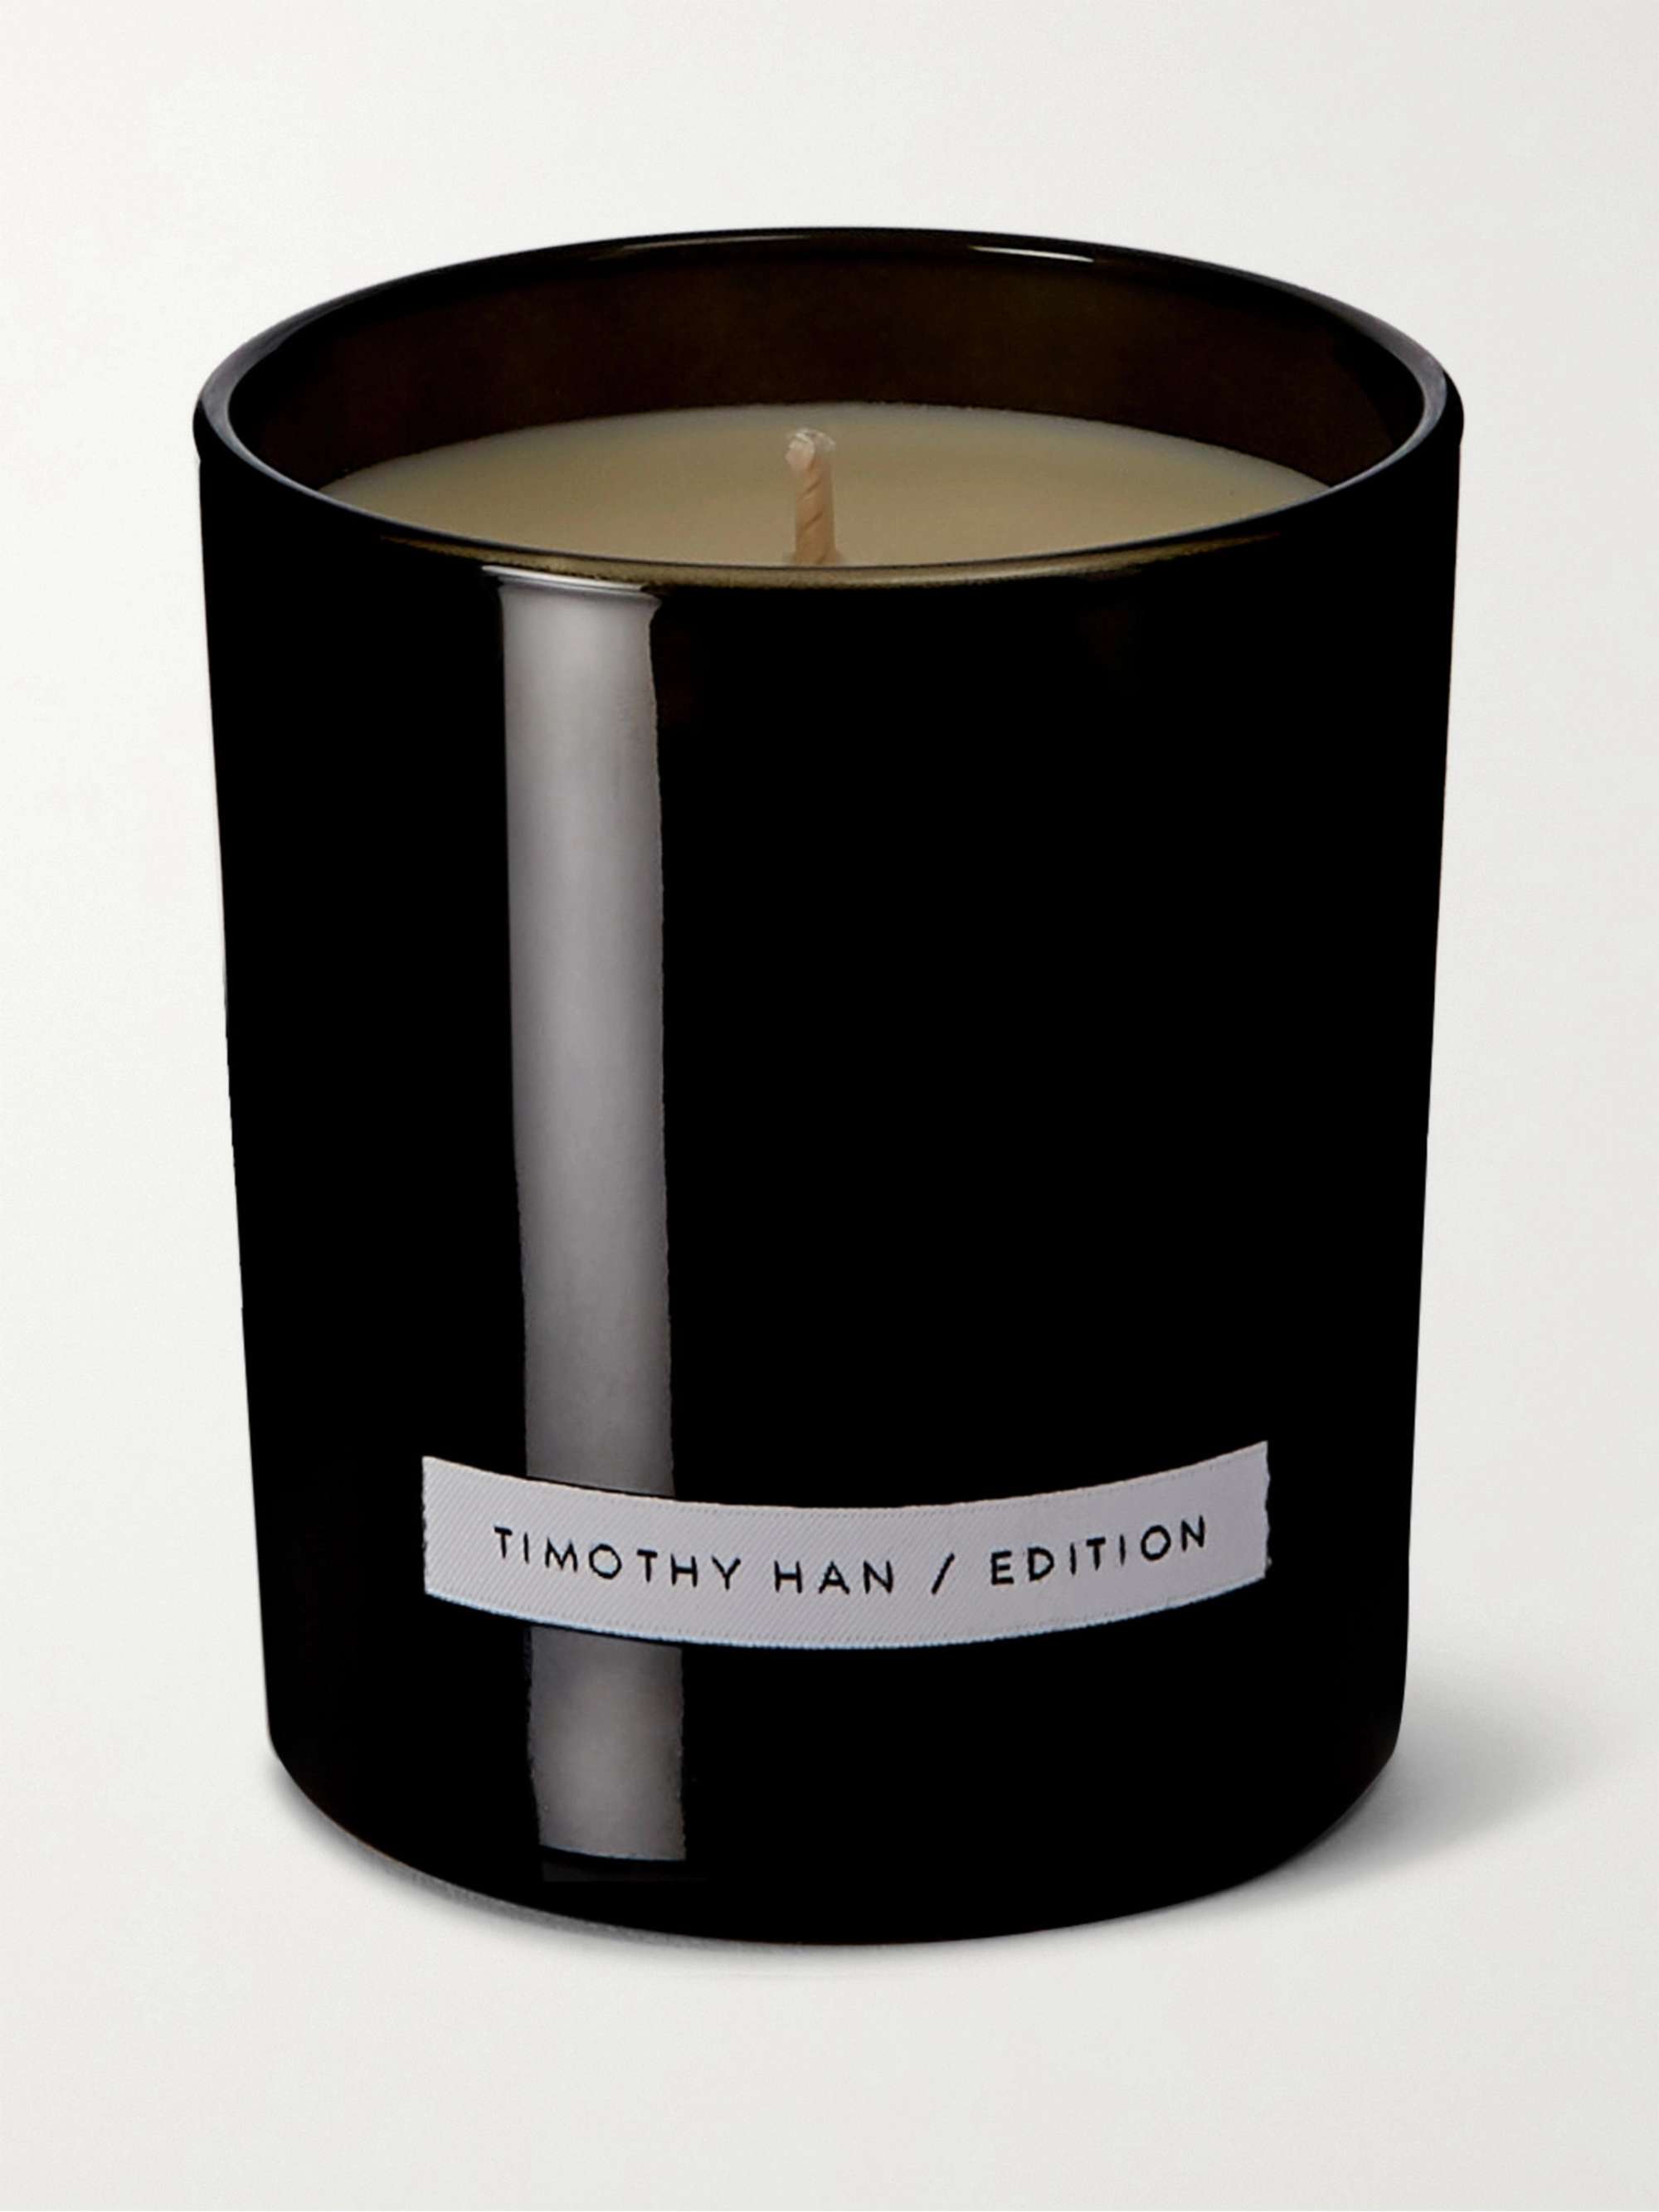 TIMOTHY HAN / EDITION Against Nature Scented Candle, 220g